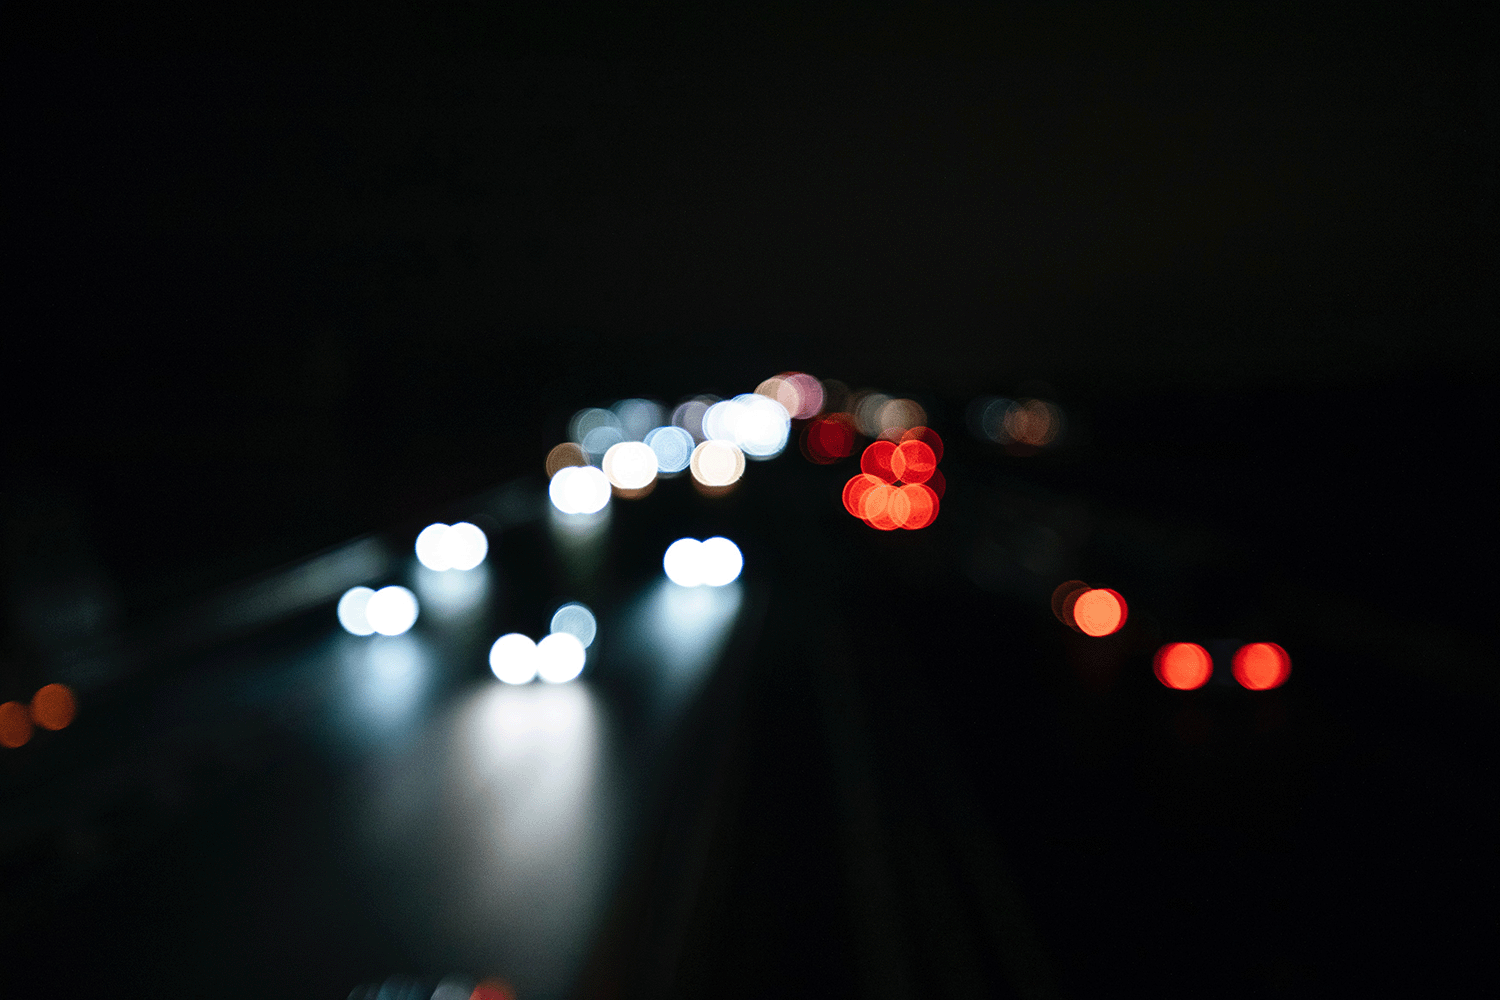 Cars driving at night with the headlights on, one example of conditions special safety concerns arise for.